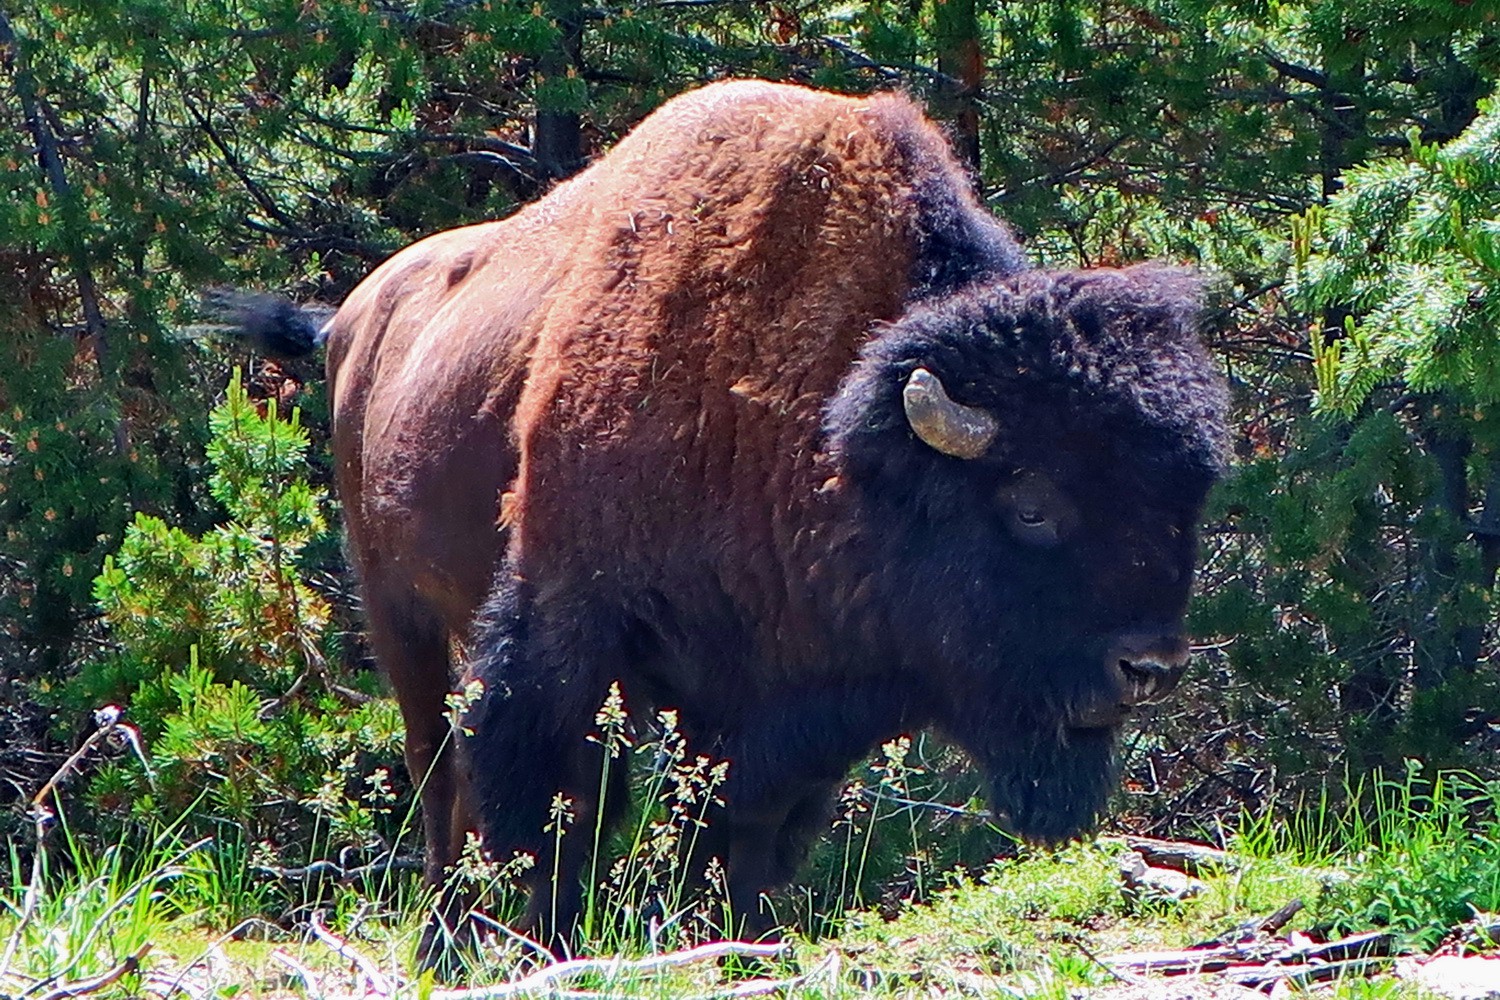 A huge beast this bison